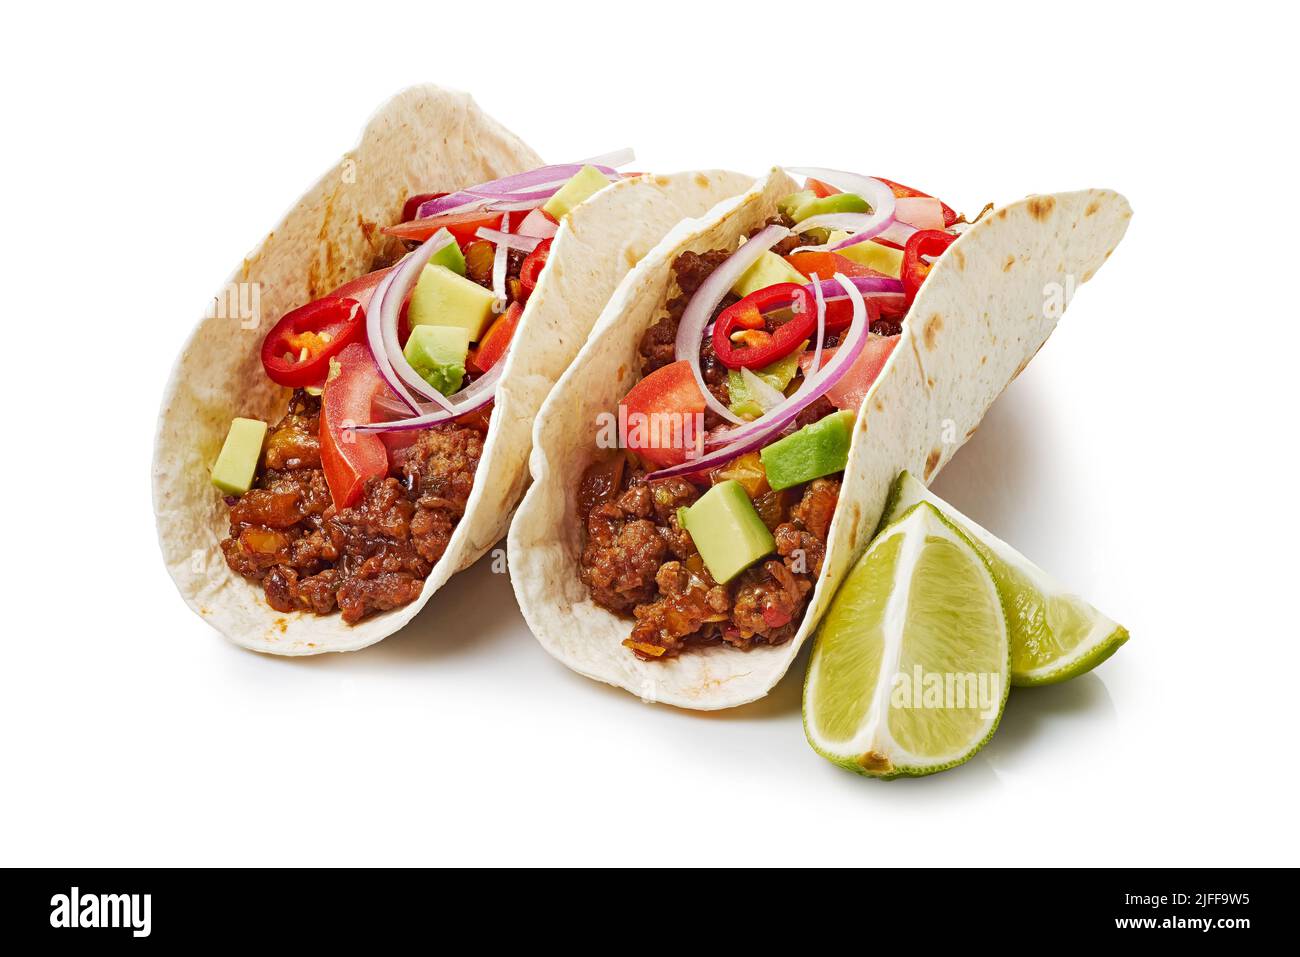 Two tacos with ground beef and lime on white background Stock Photo